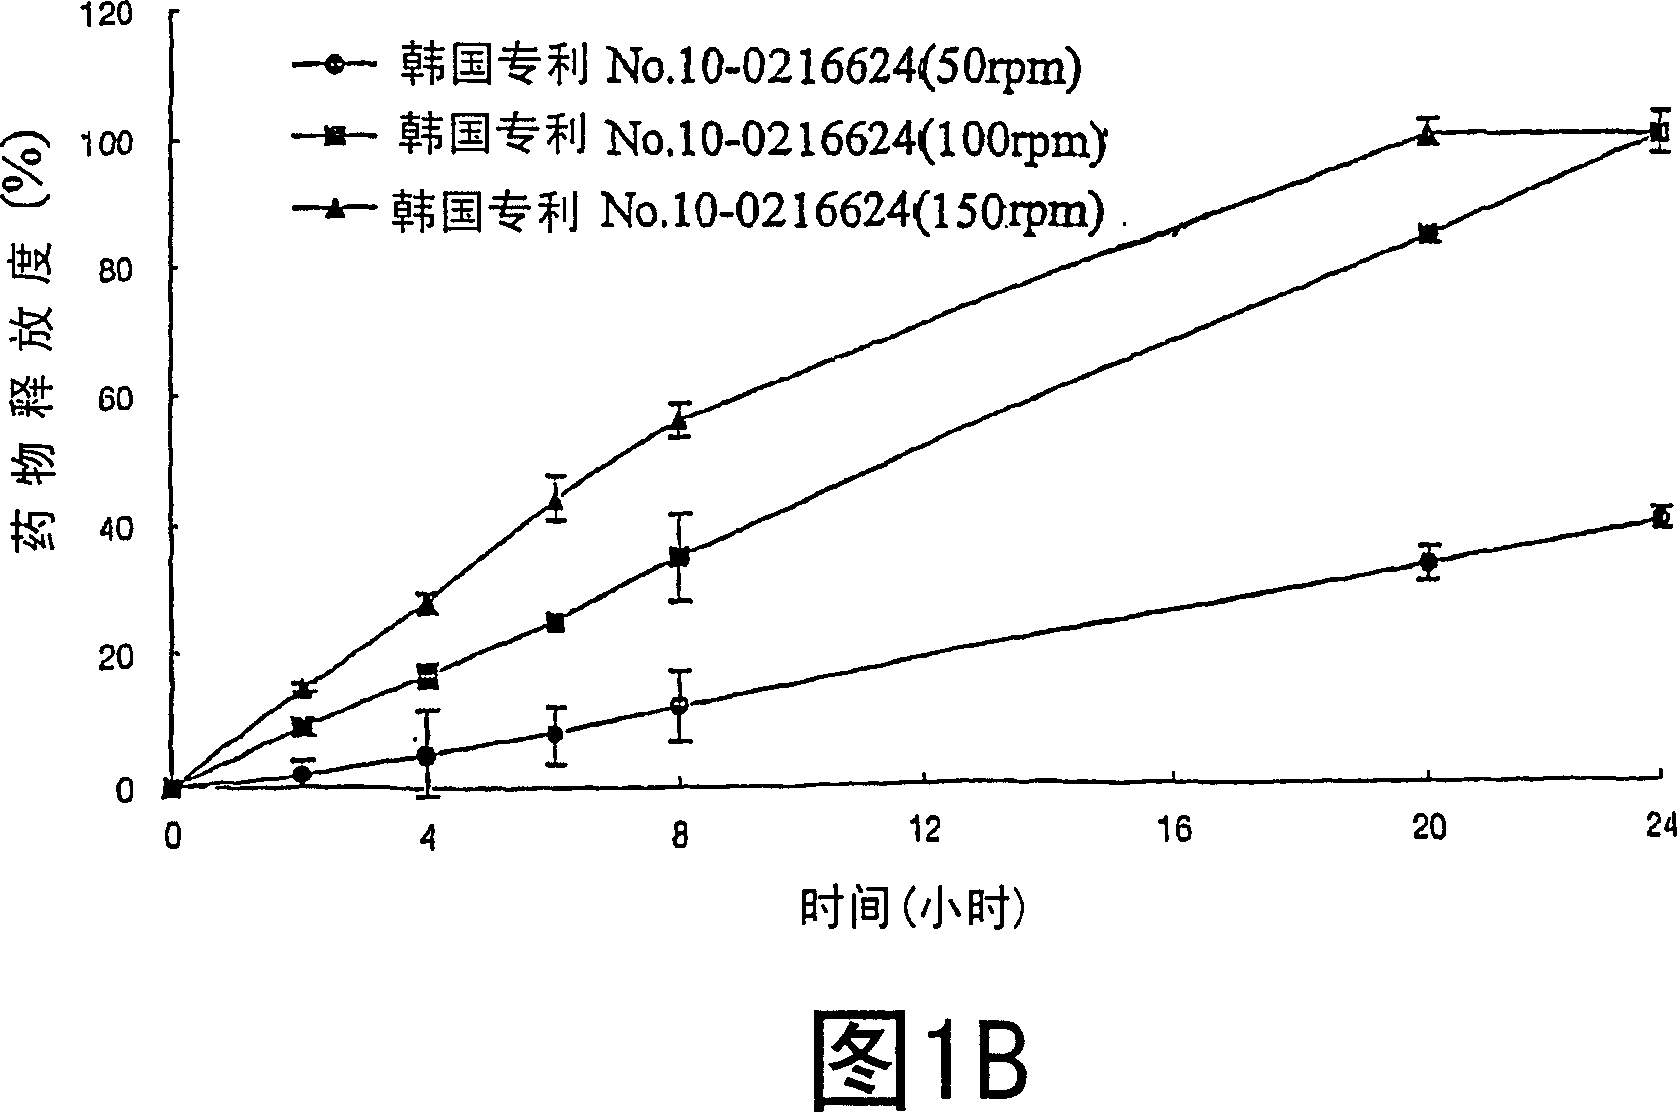 Sustained release composition for oral administration of drugs